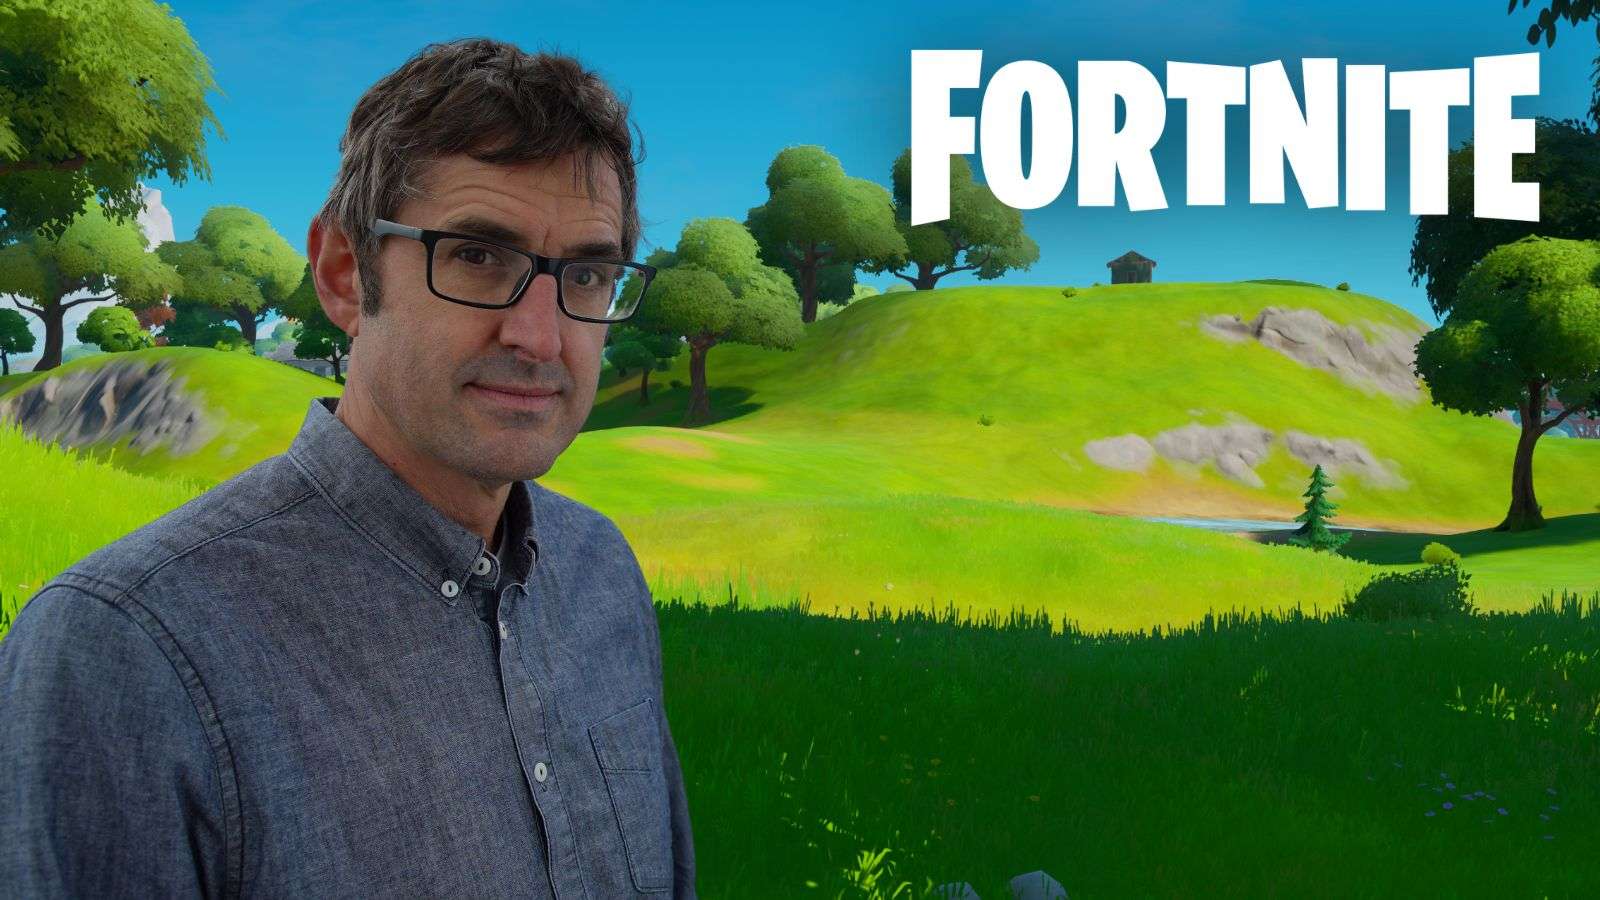 Louis Theroux with Fortnite logo